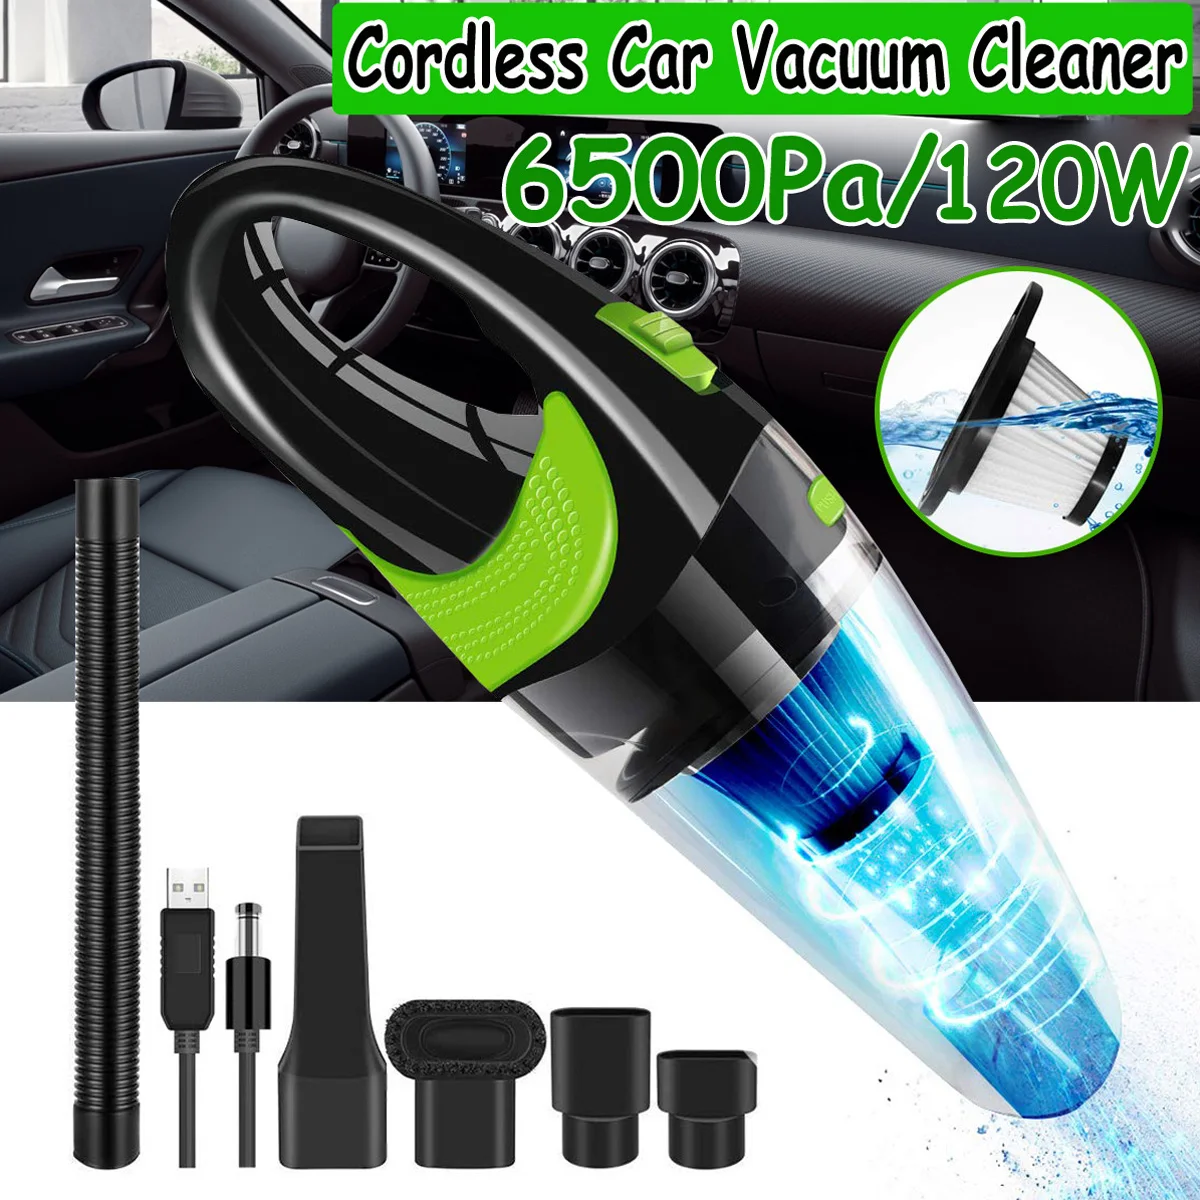 

6500pa Strong Power Car Vacuum Cleaner DC 12V 120W Cordless Wet and Dry Dual Use Auto Portable Vacuums Cleaner for Home Office